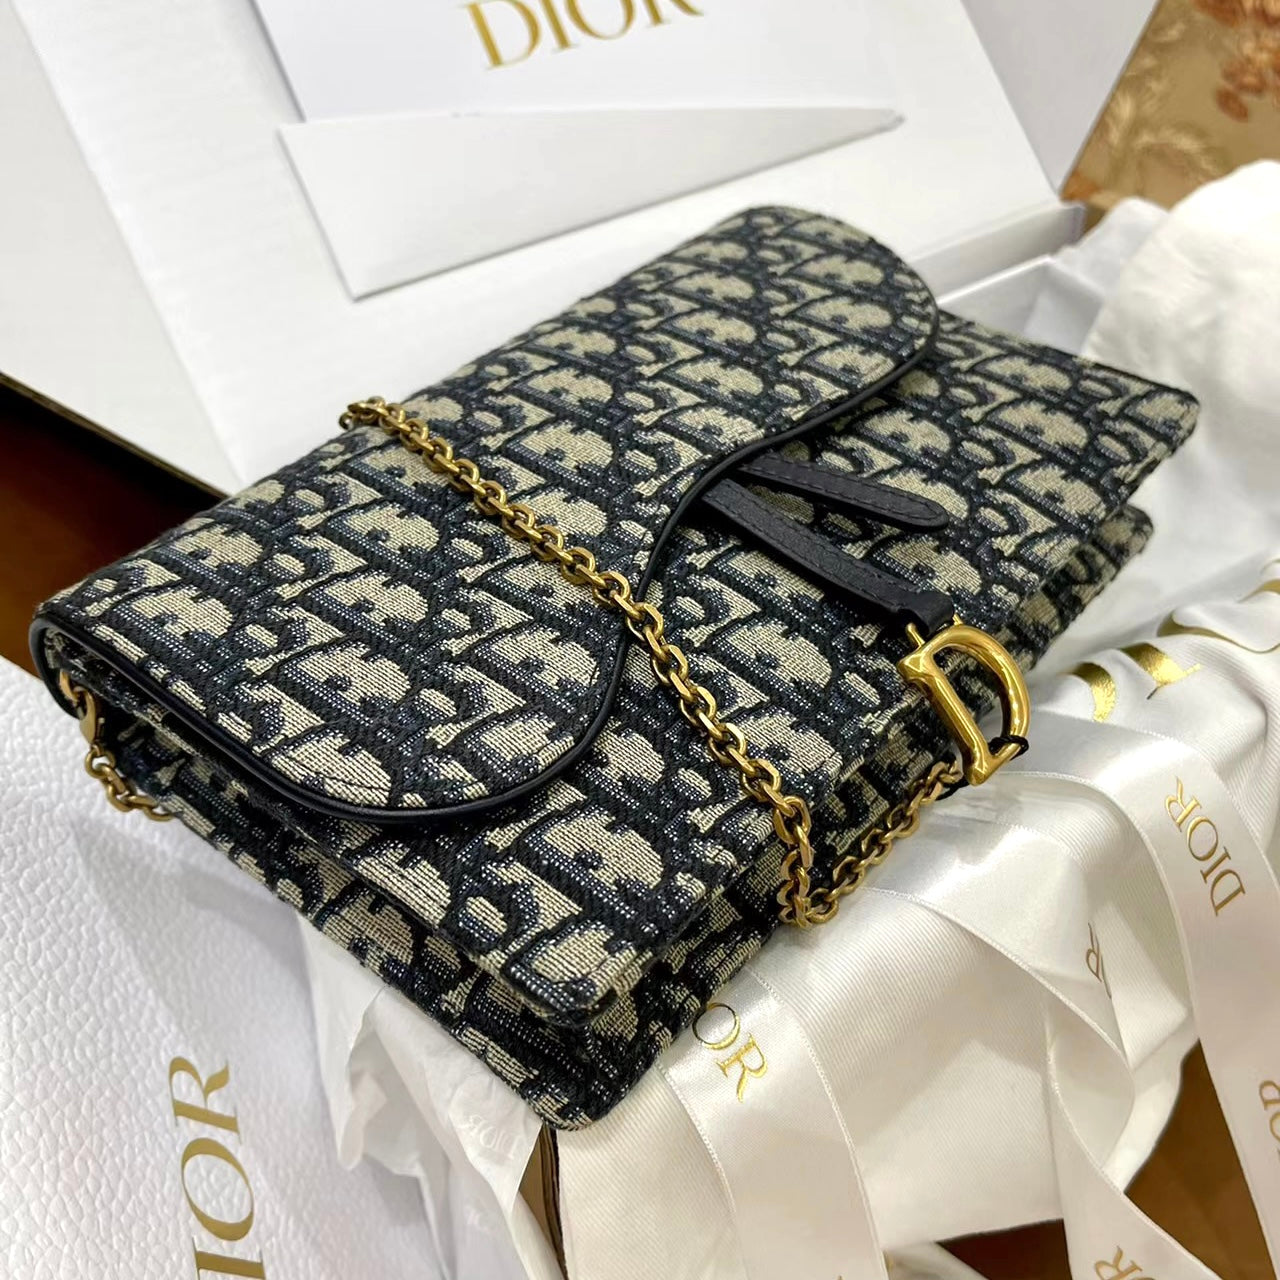 Dior▪️Saddle Pouch With Chain 緹花馬鞍鍊包/1550E1 700 🉐60500🇪🇺